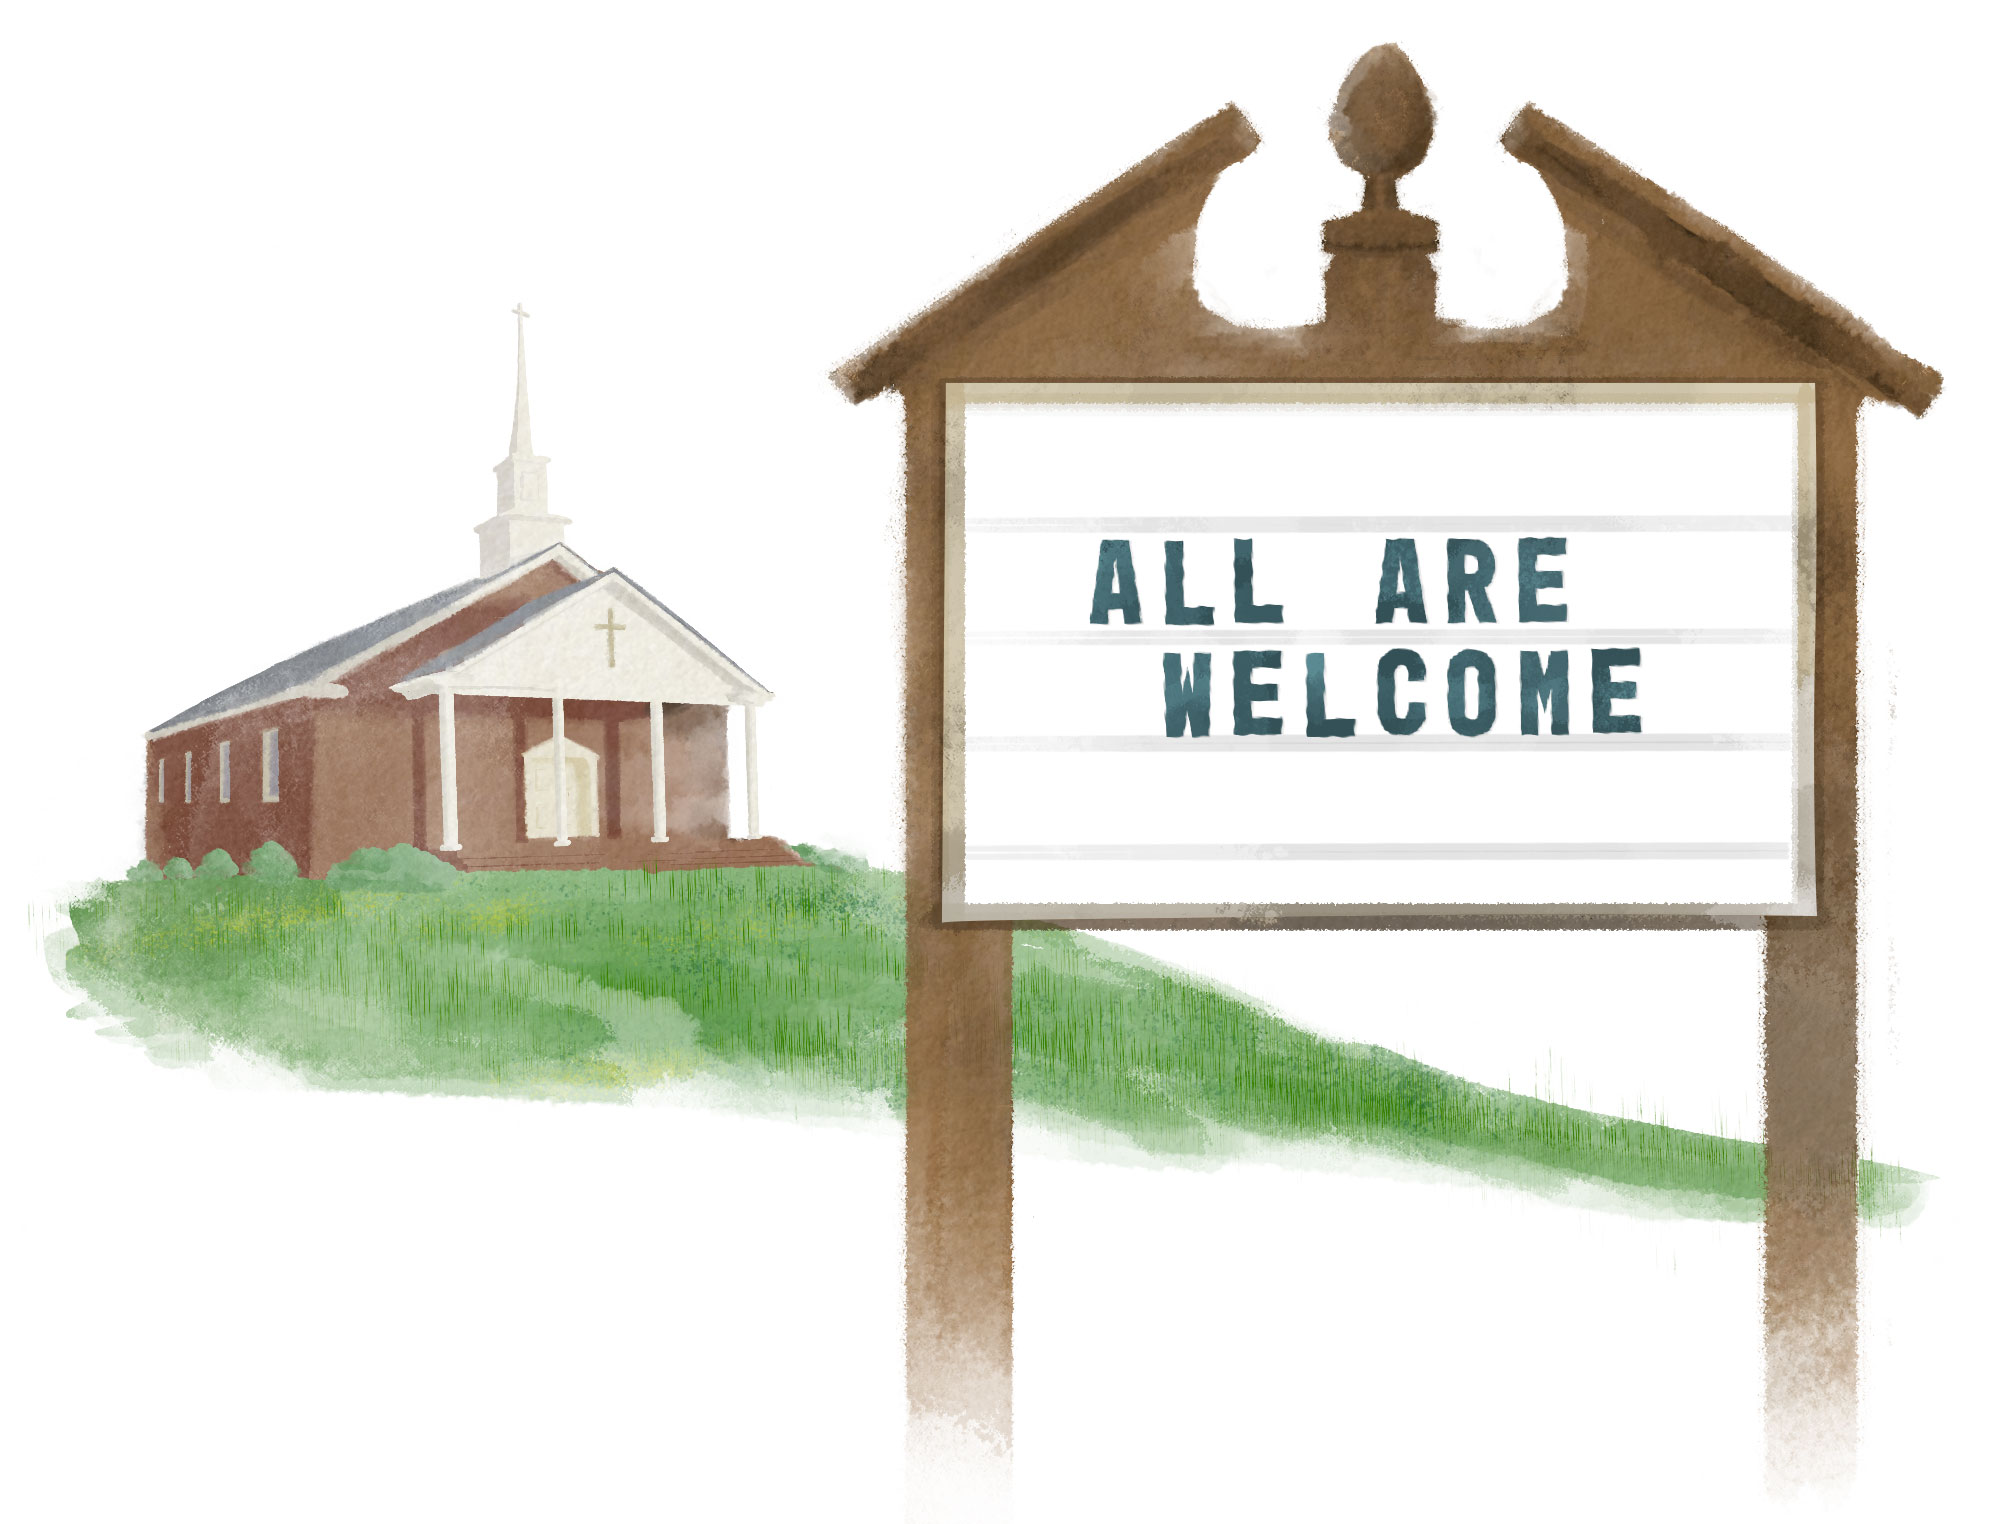 All Are Welcome church sign illustration